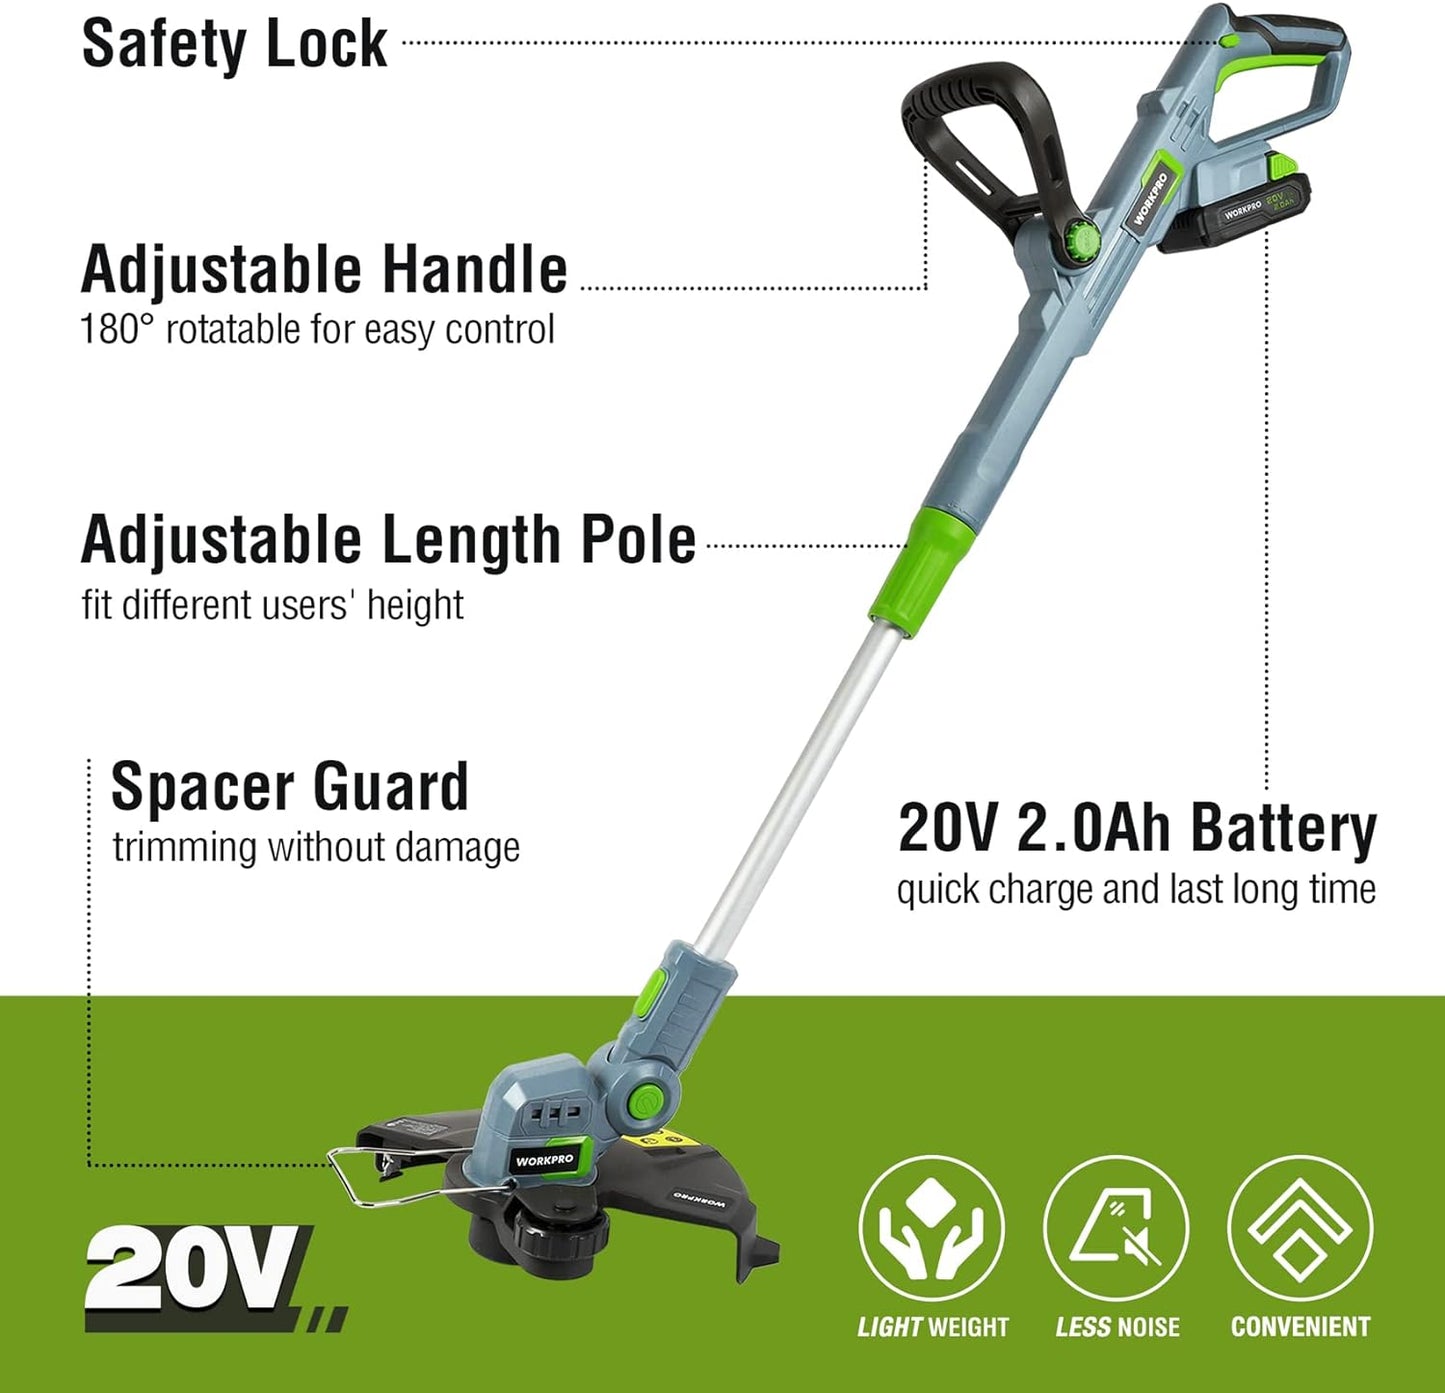 WORKPRO 20V Cordless String Trimmer/Edger, 12-inch, with 2Ah Lithium-Ion Battery, 1 Hour Quick Charger, 16.4ft Trimmer Line Included